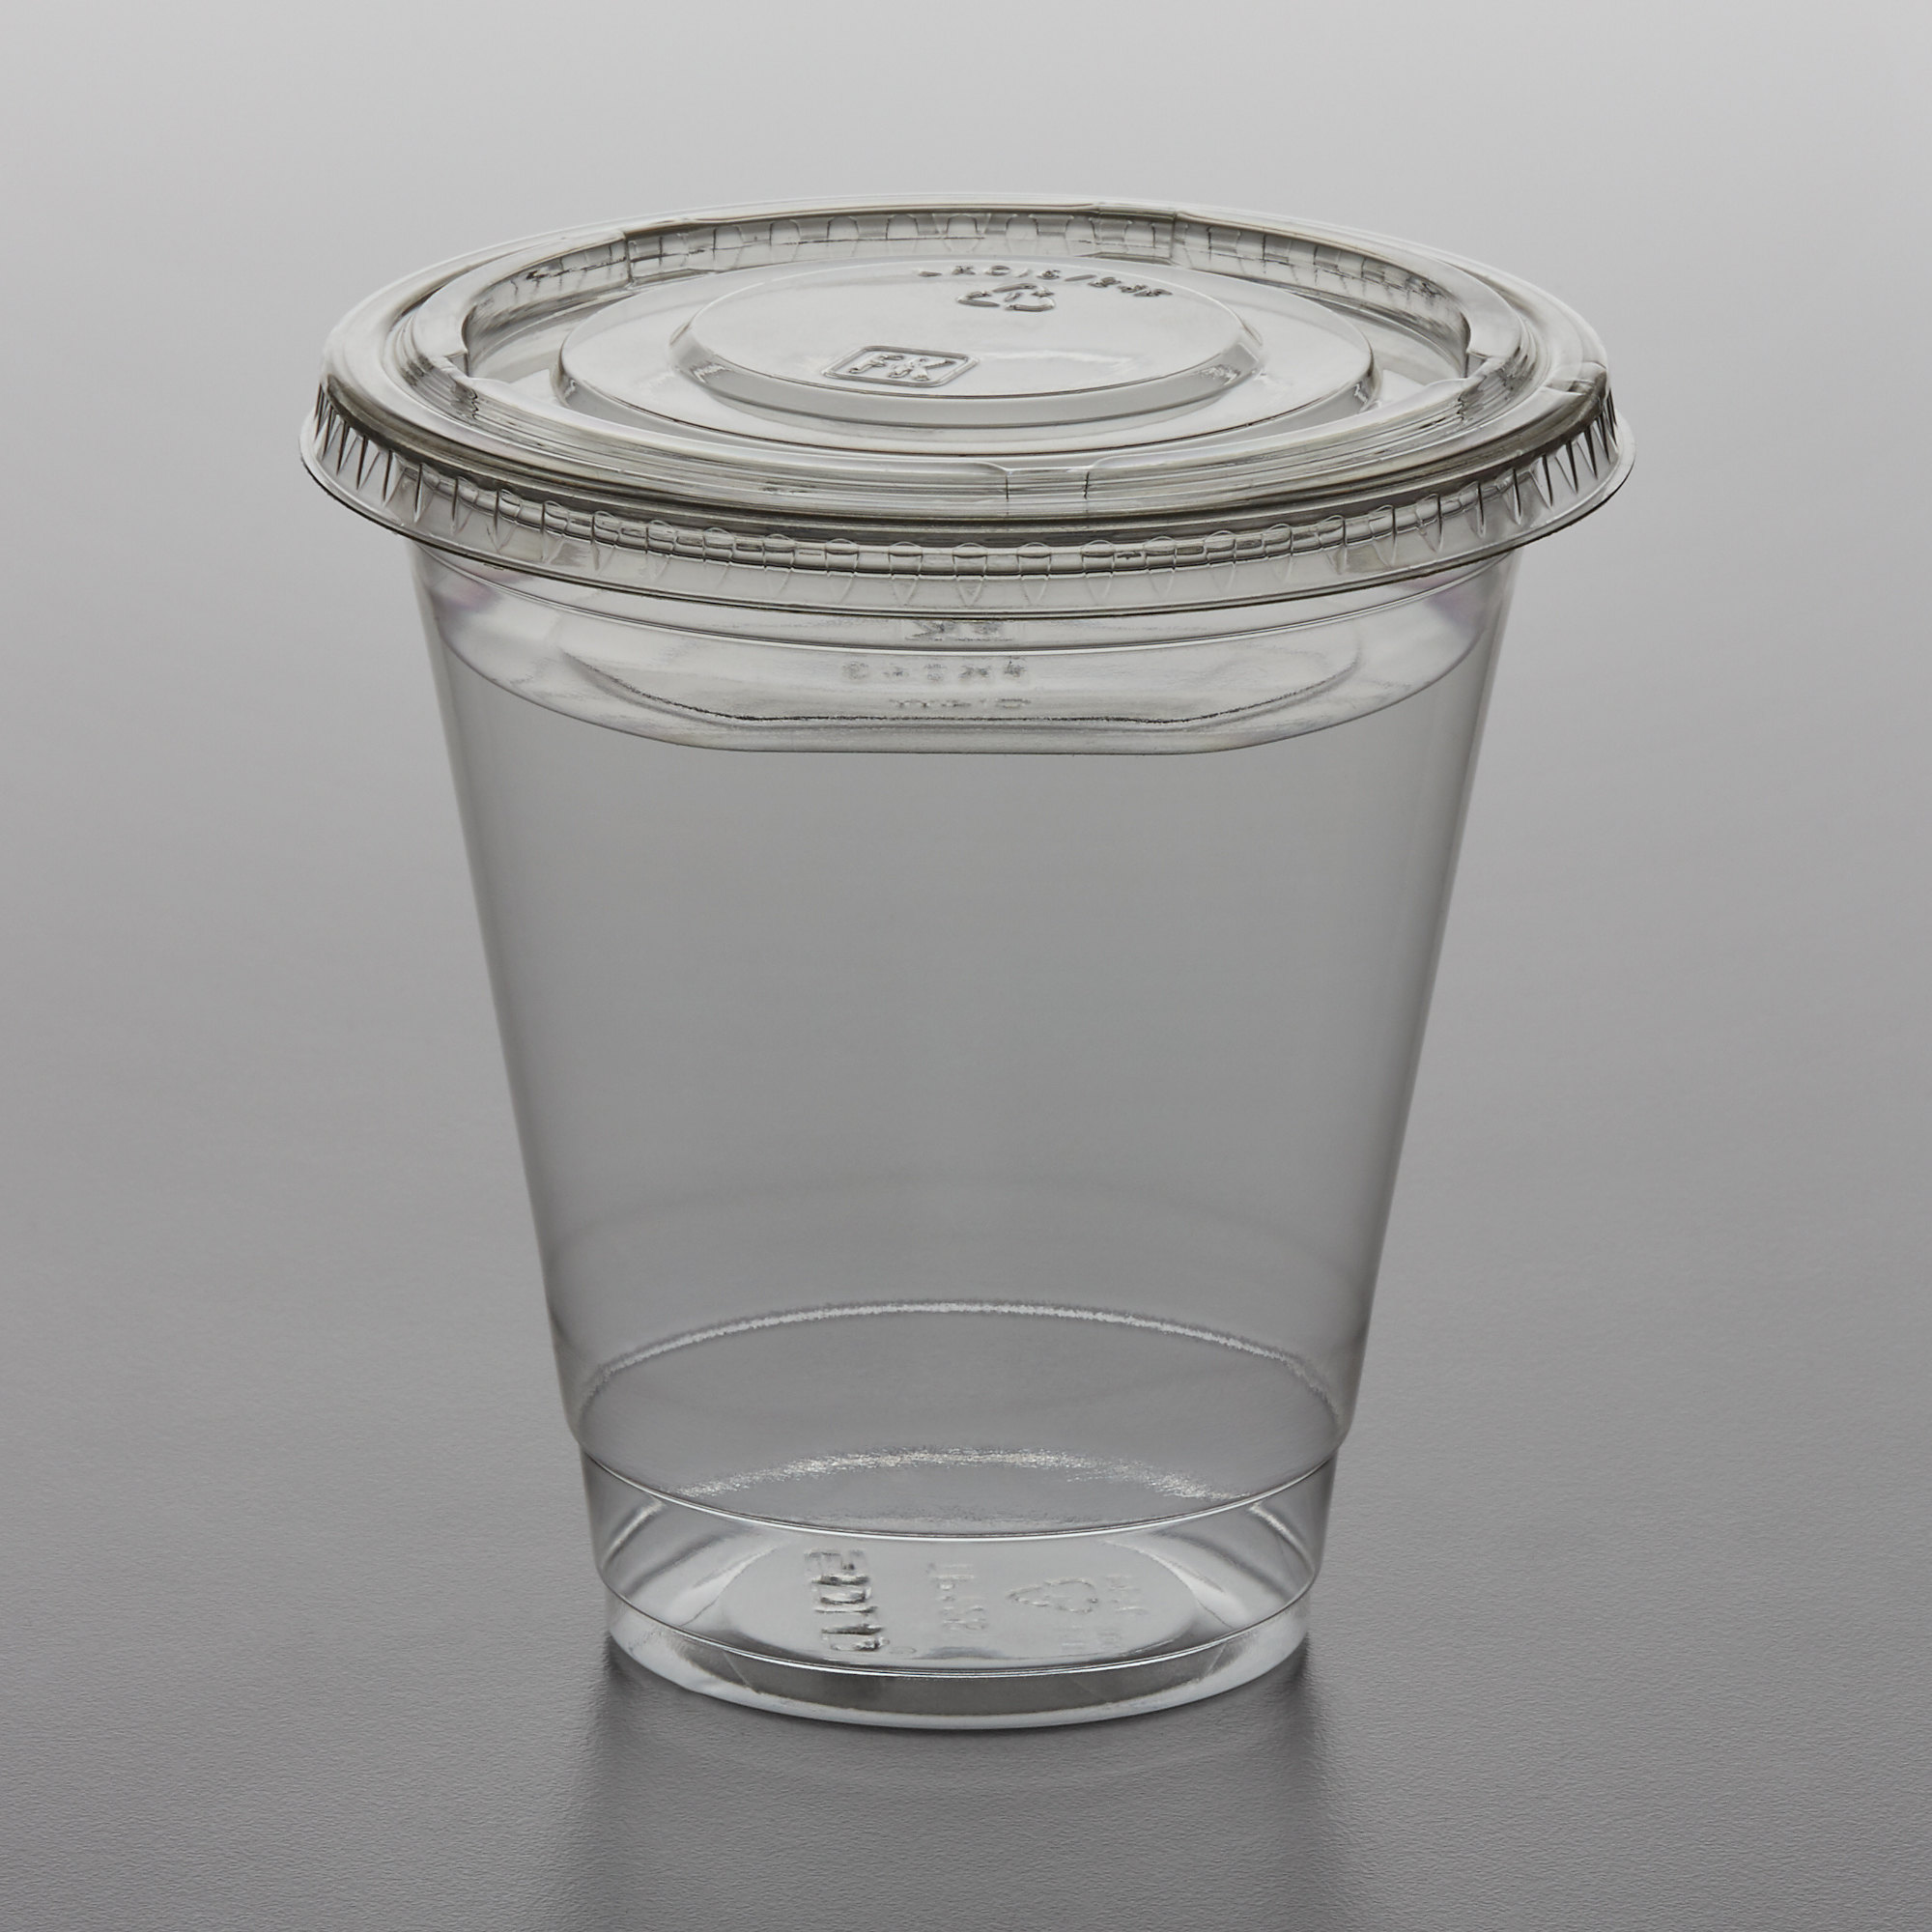 12 oz. Parfait Cup with 4 oz. Fabri-Kal Insert, Flat Lid, and Tall Dome Lid  - 100/Case